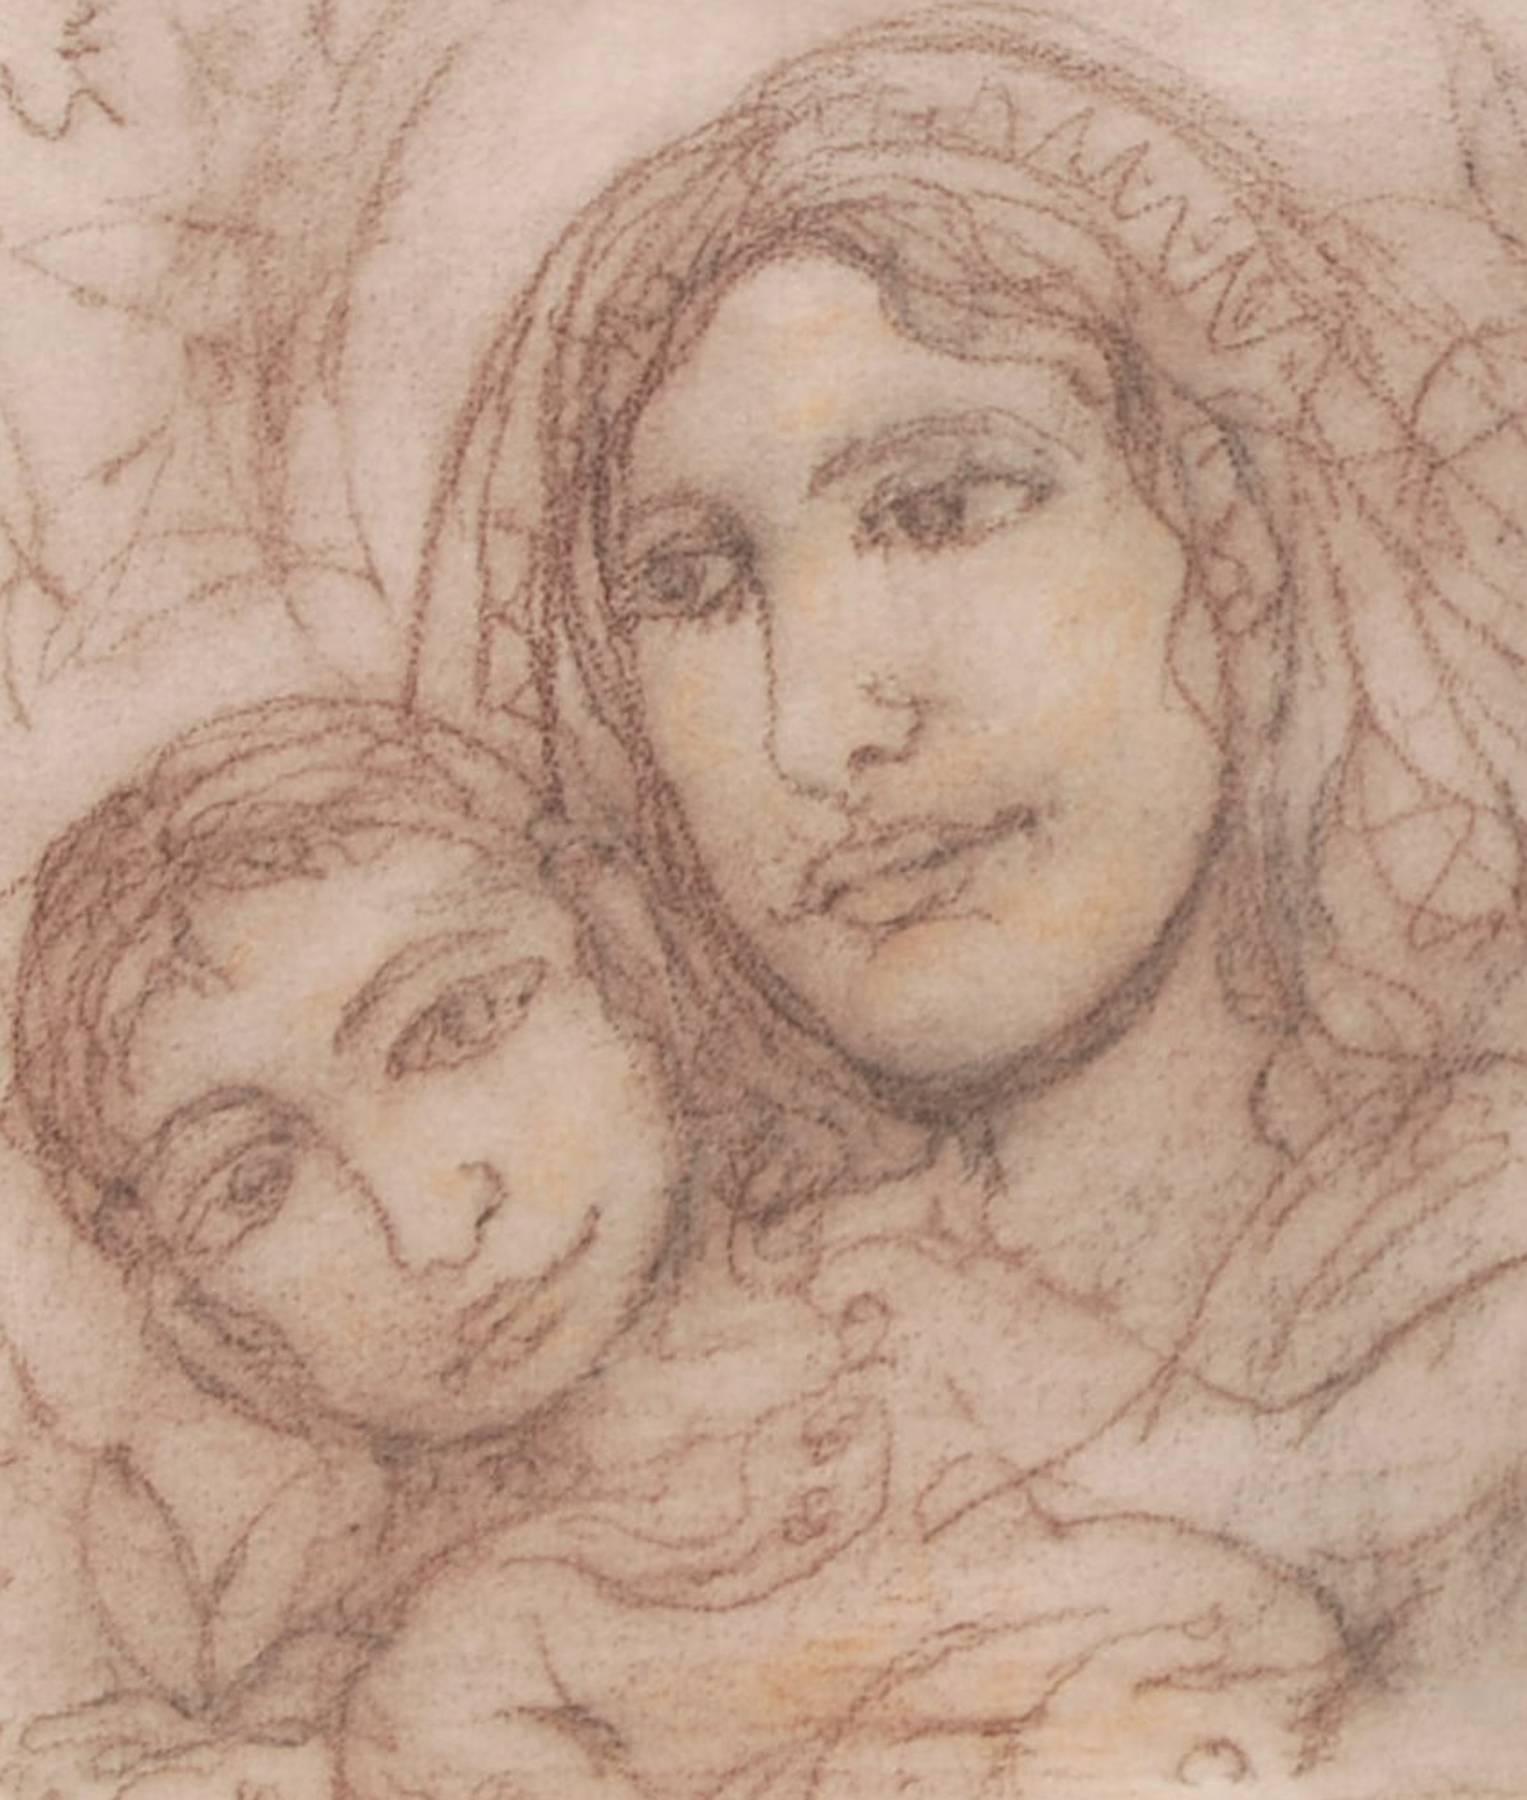 Suhas Roy - Mother and Child - 16 x 20 inches (unframed size)
Mixed Media on Imported paper.
Inclusive of shipment in roll form.

Mother and Child : Modern Indian Art by Suhas Roy in Mixed Media on paper
